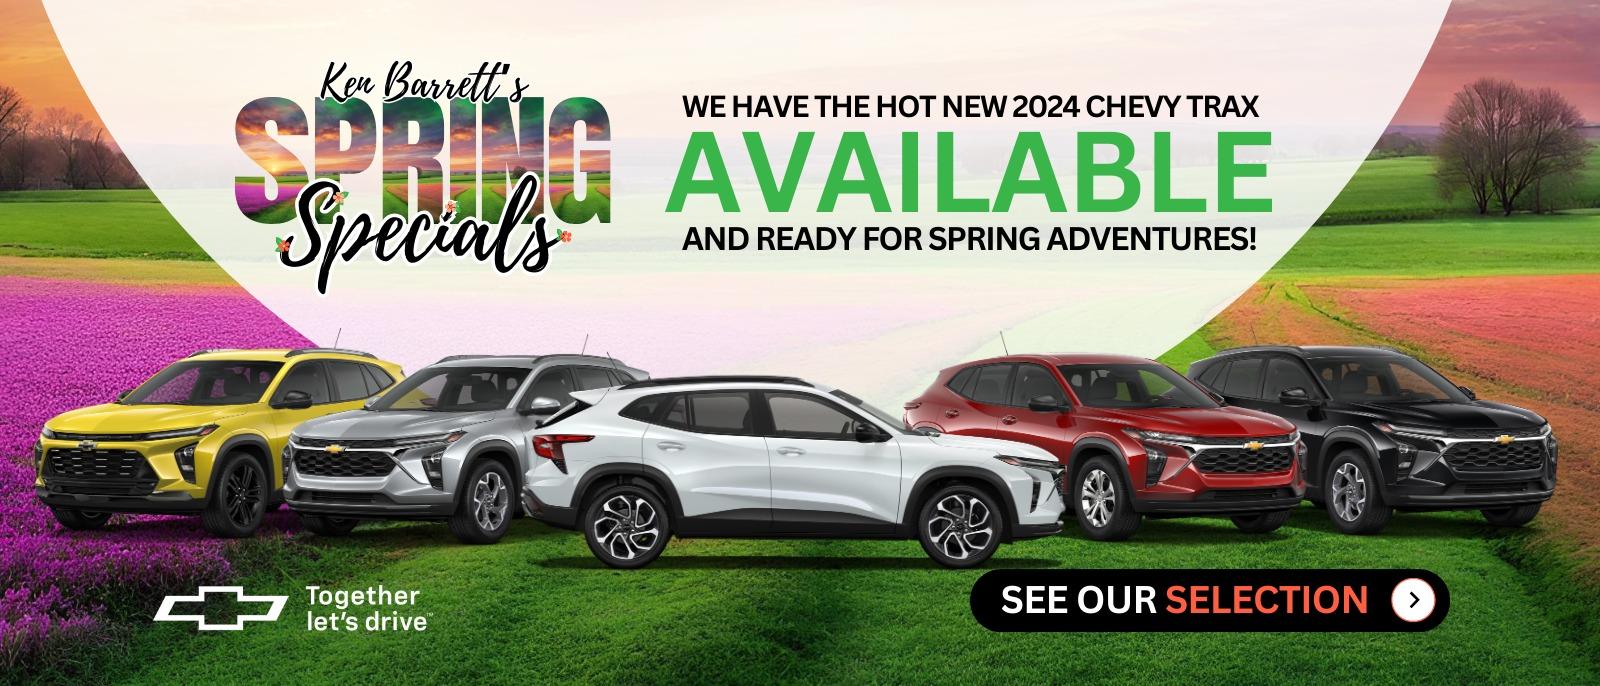 Ken Barrett's Spring Specials new deals on new Chevrolets in Batavia NY.  Find the Chevy deal for you.  Check out the new car deal on this brand new Chevrolet Trax